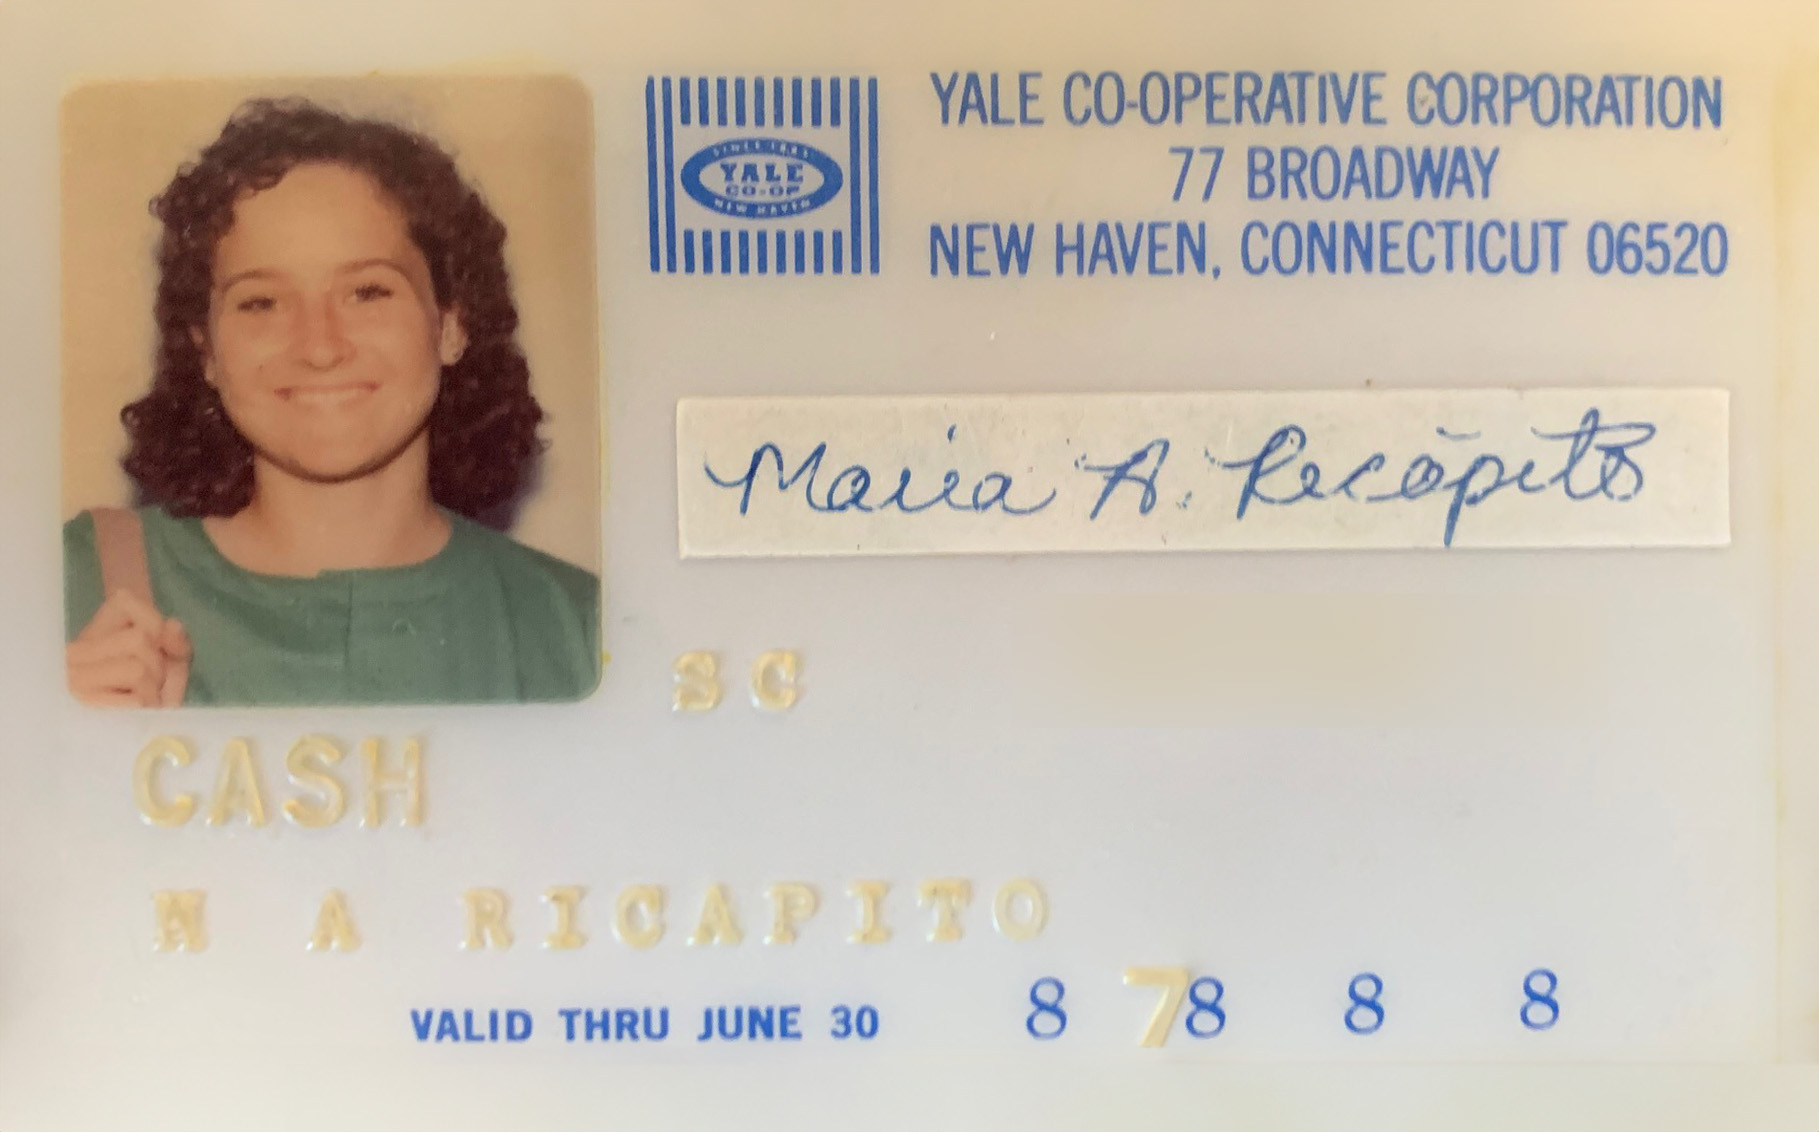 Maria's Yale Co-op card from her time as a student